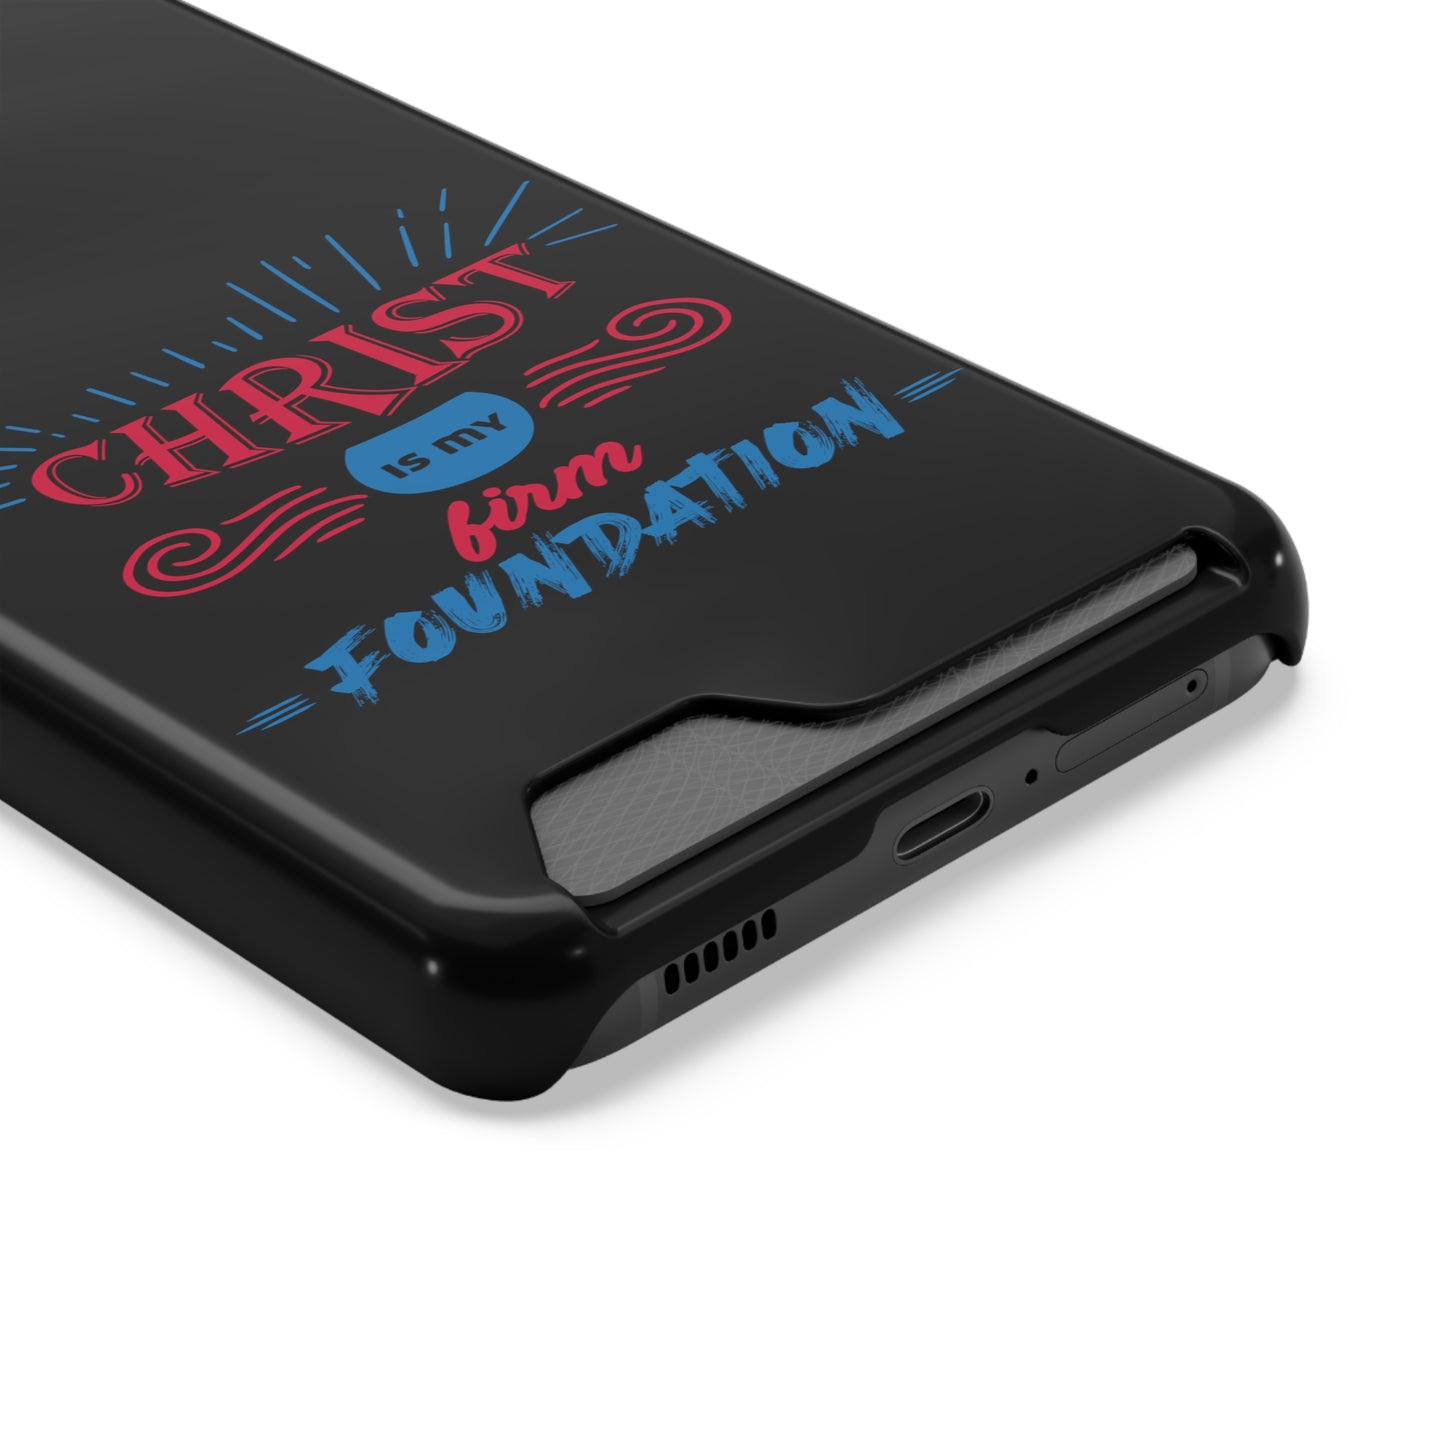 Christ Is My Firm Foundation Phone Case With Card Holder